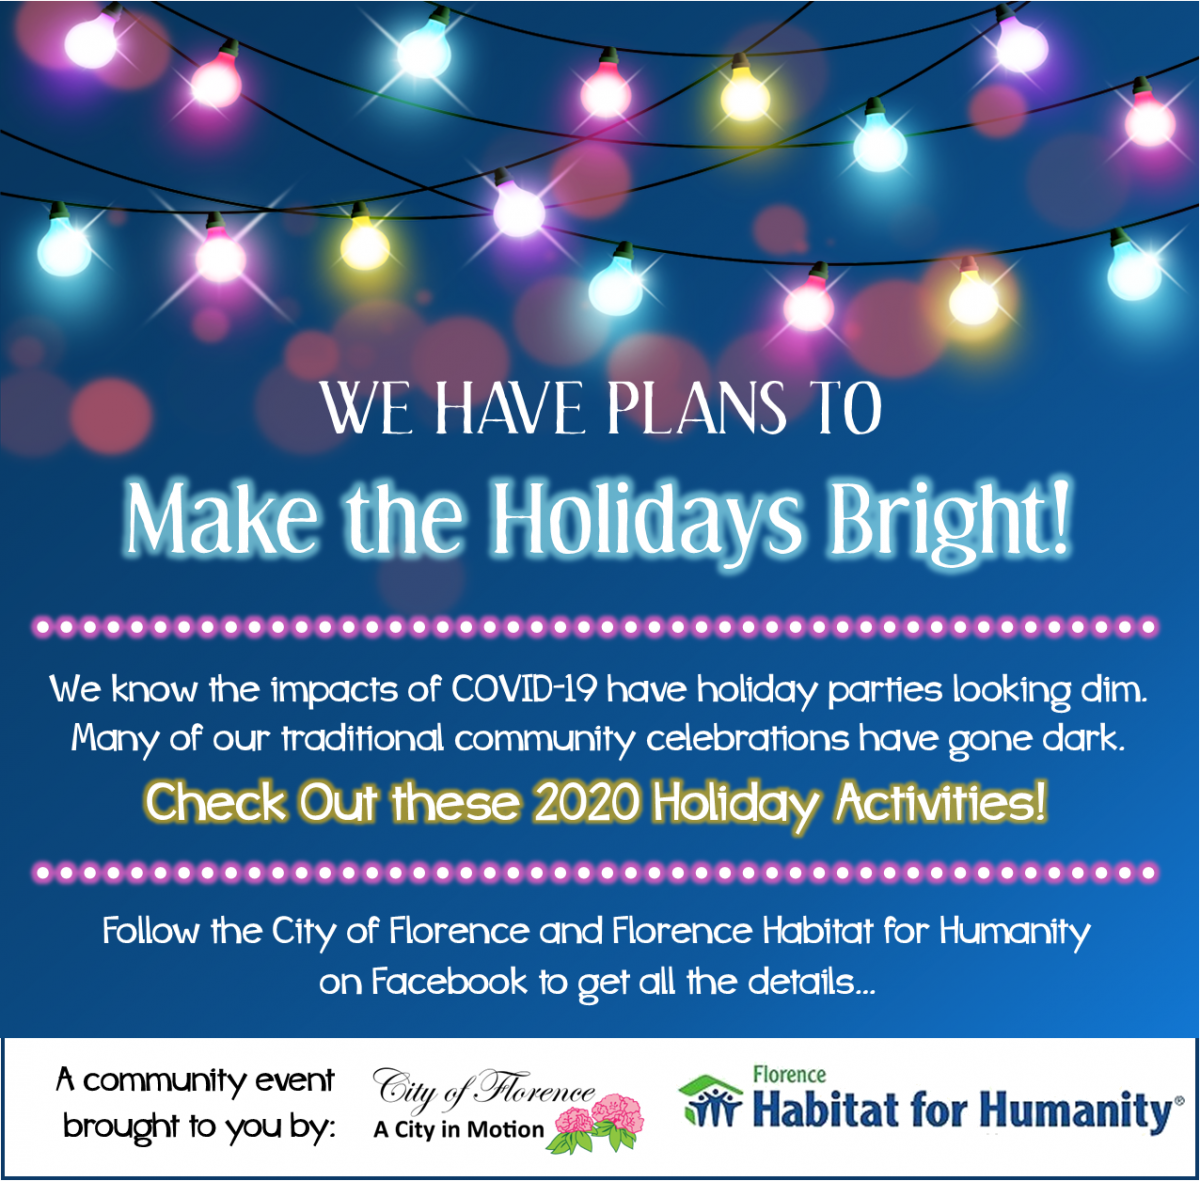 2020 Home for the Holidays | City of Florence Oregon